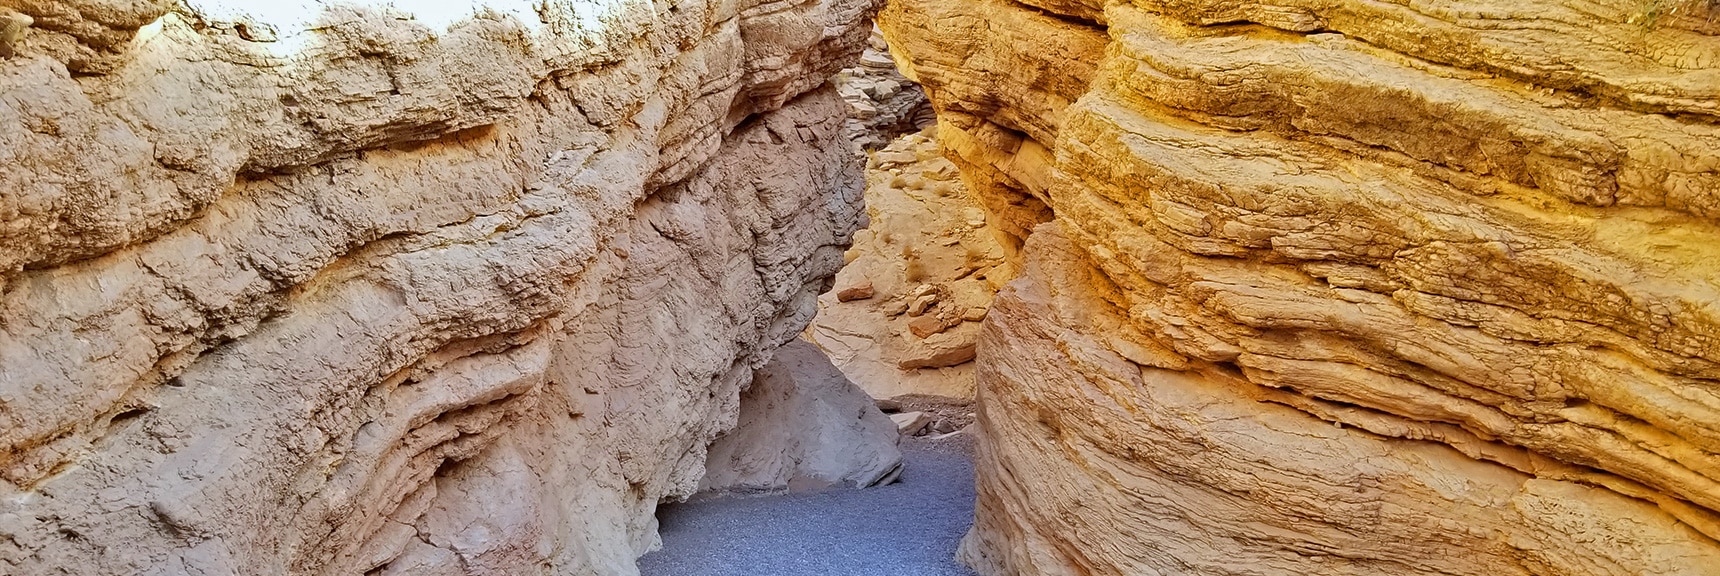 First View of This Amazing Slot Canyon Sculpted by Water | Anniversary Narrows | Muddy Mountains Wilderness, Nevada